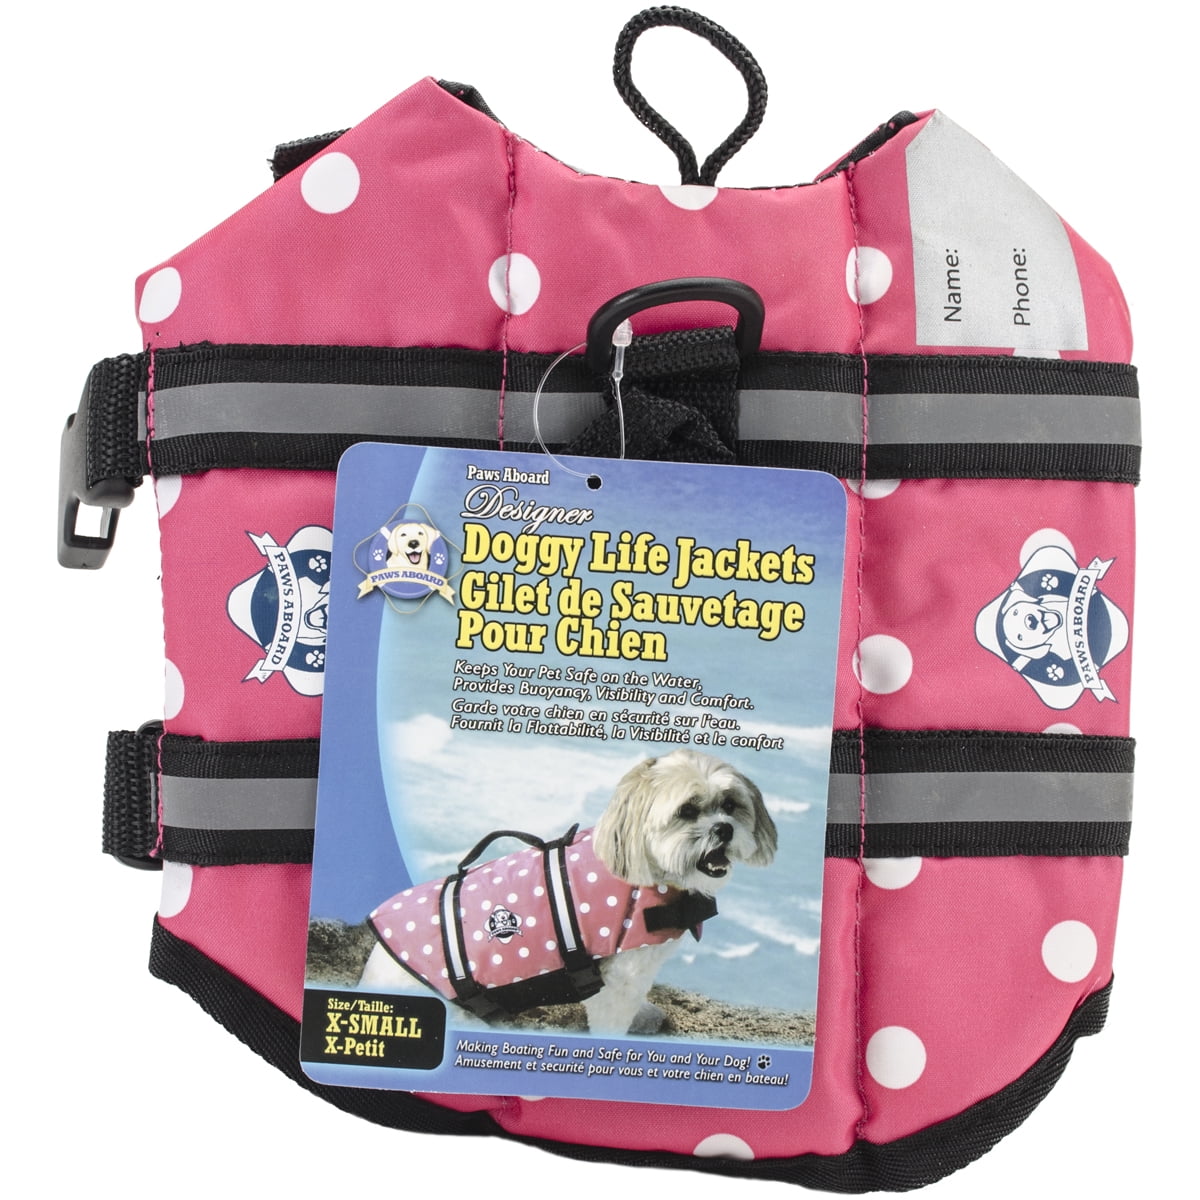 Paws Aboard BY1300 Neoprene Doggy Life Jacket Small